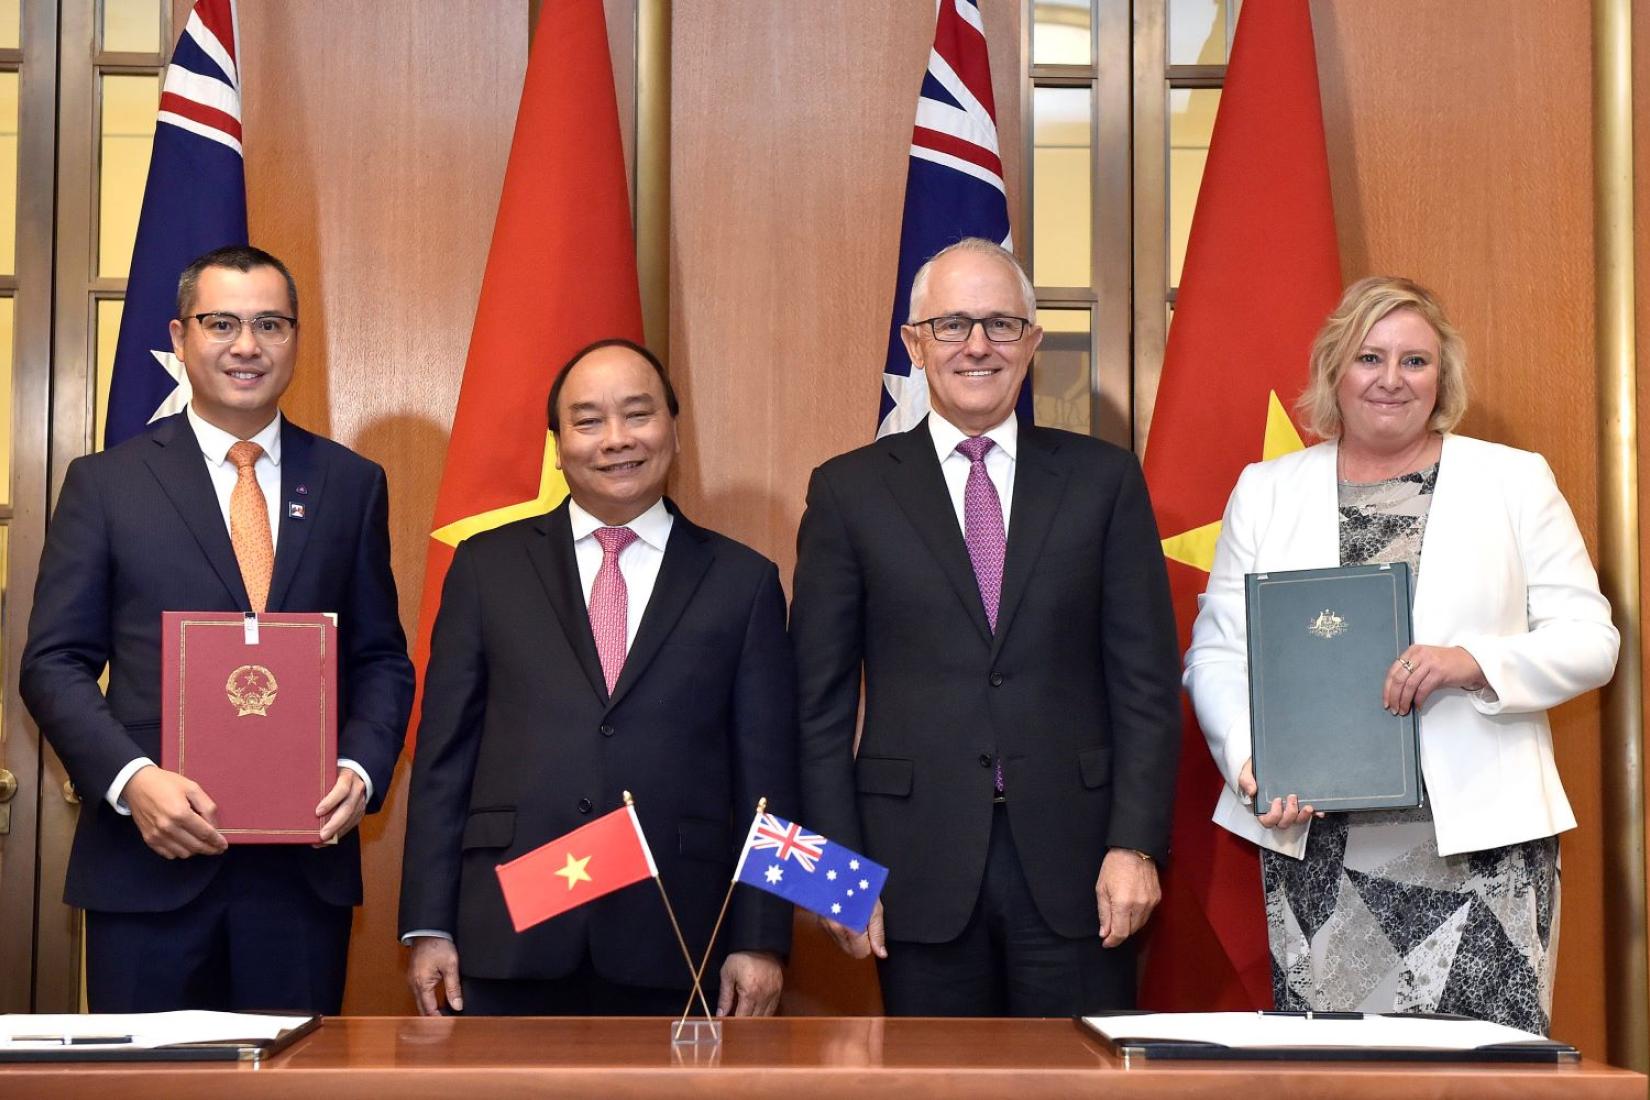 Four people standing with flags of Vietnam and Australia while displaying books with Vietnam and Australian crests